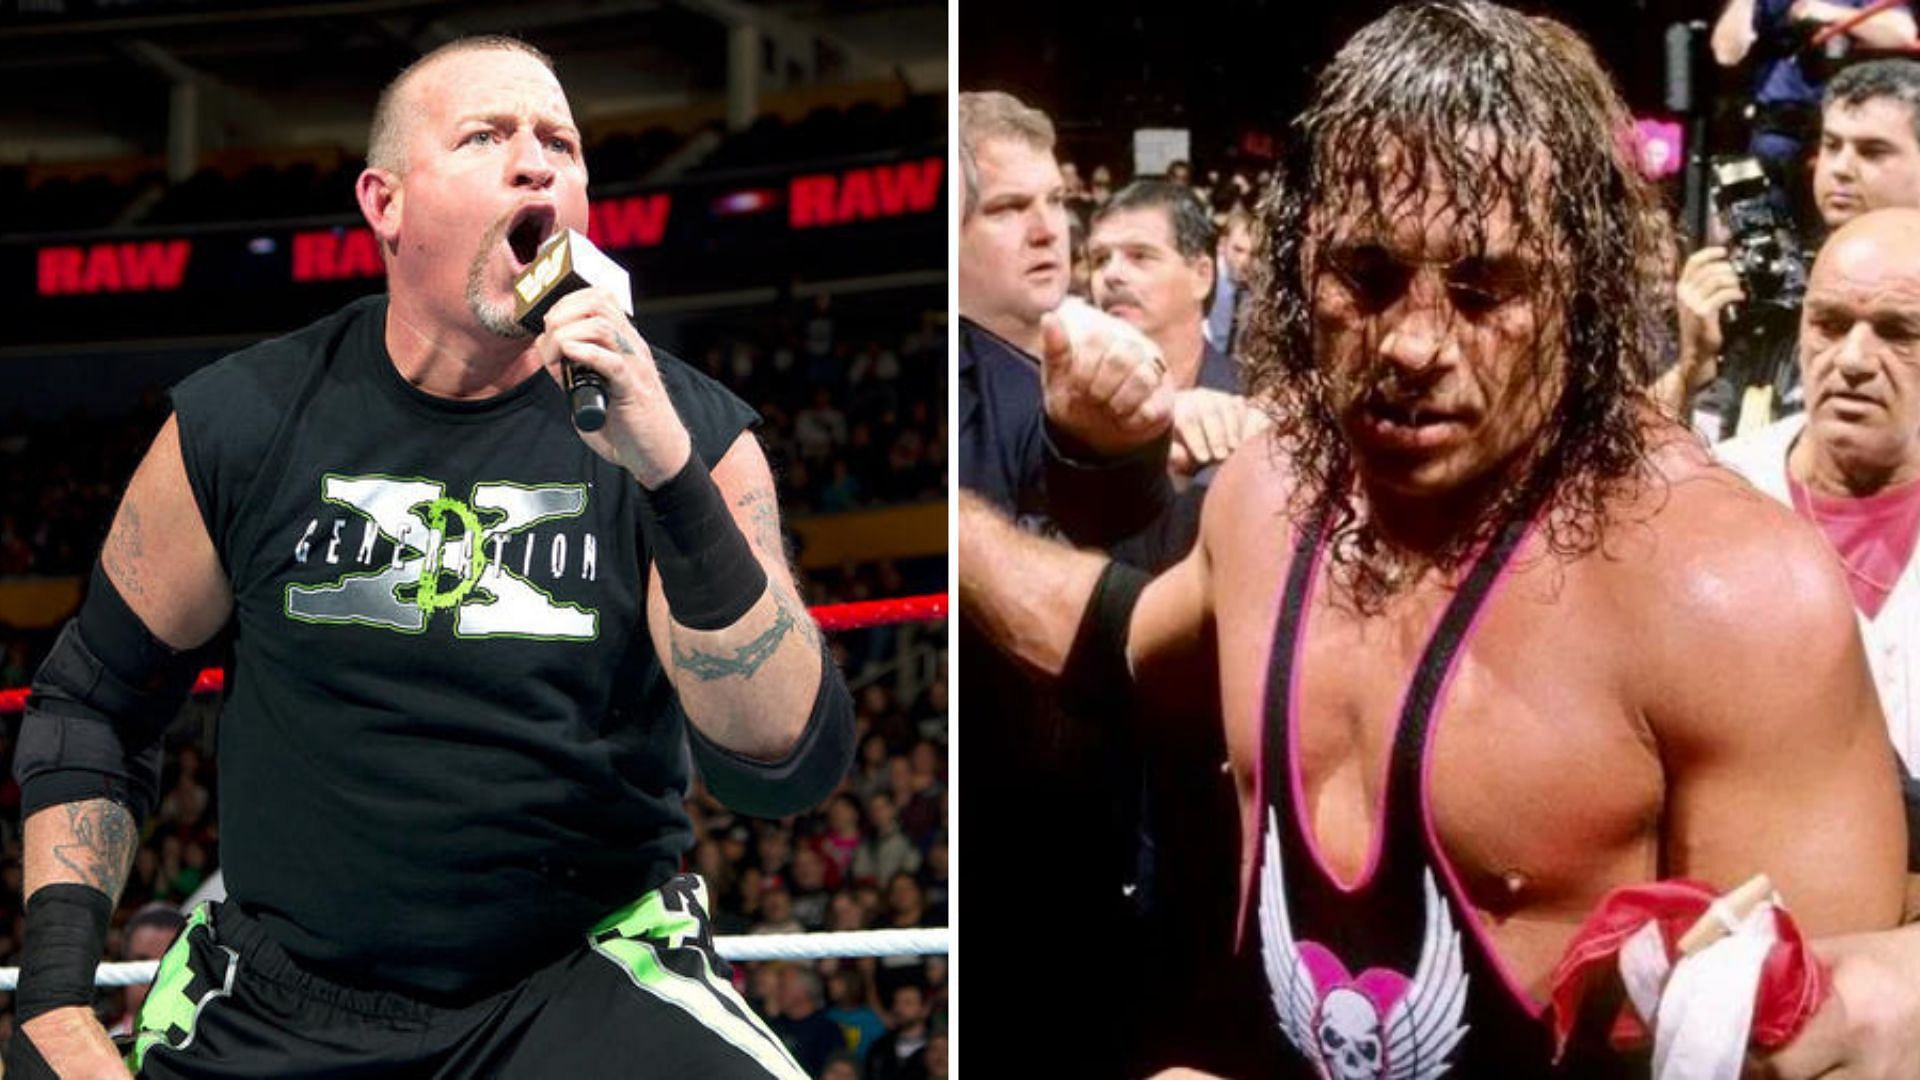 Road Dogg compares himself with Bret Hart